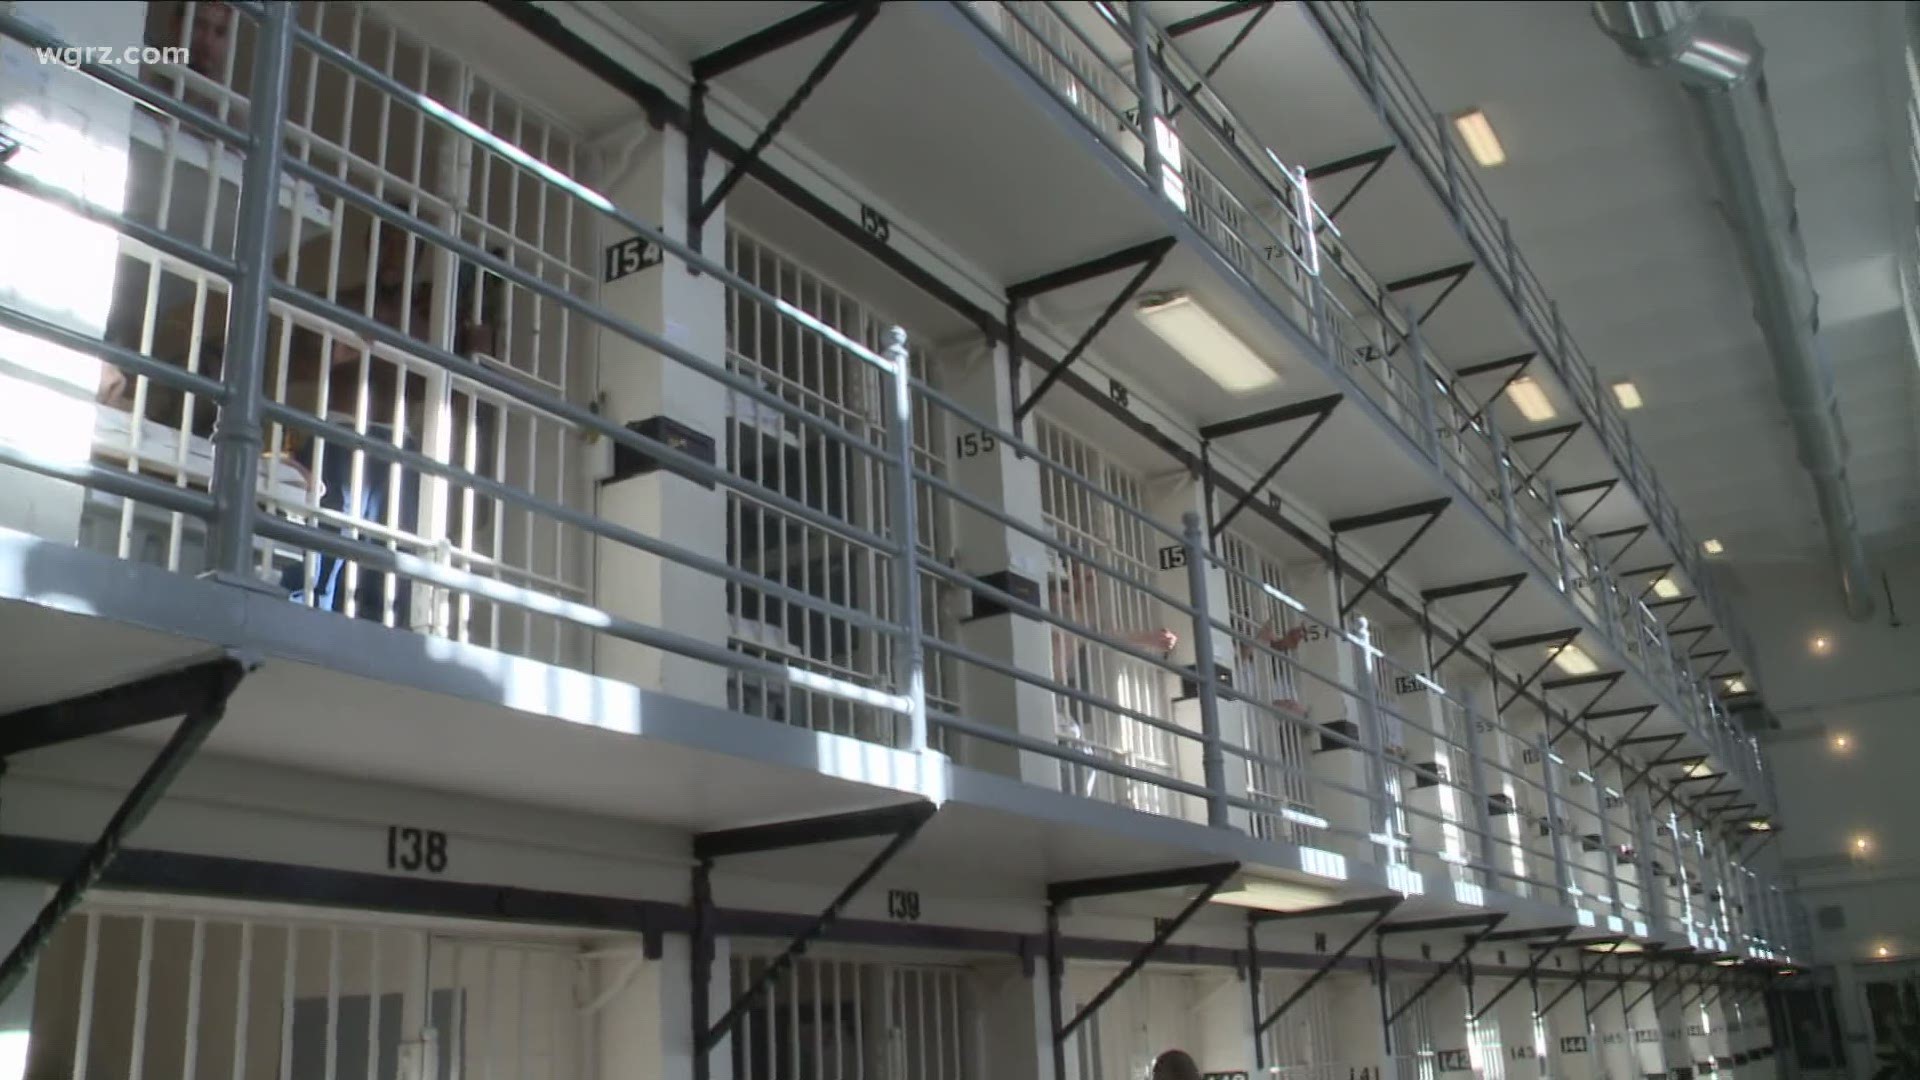 The New York State Department of Corrections says there are a little less than 1,100 inmates who are 65 and older within the system.